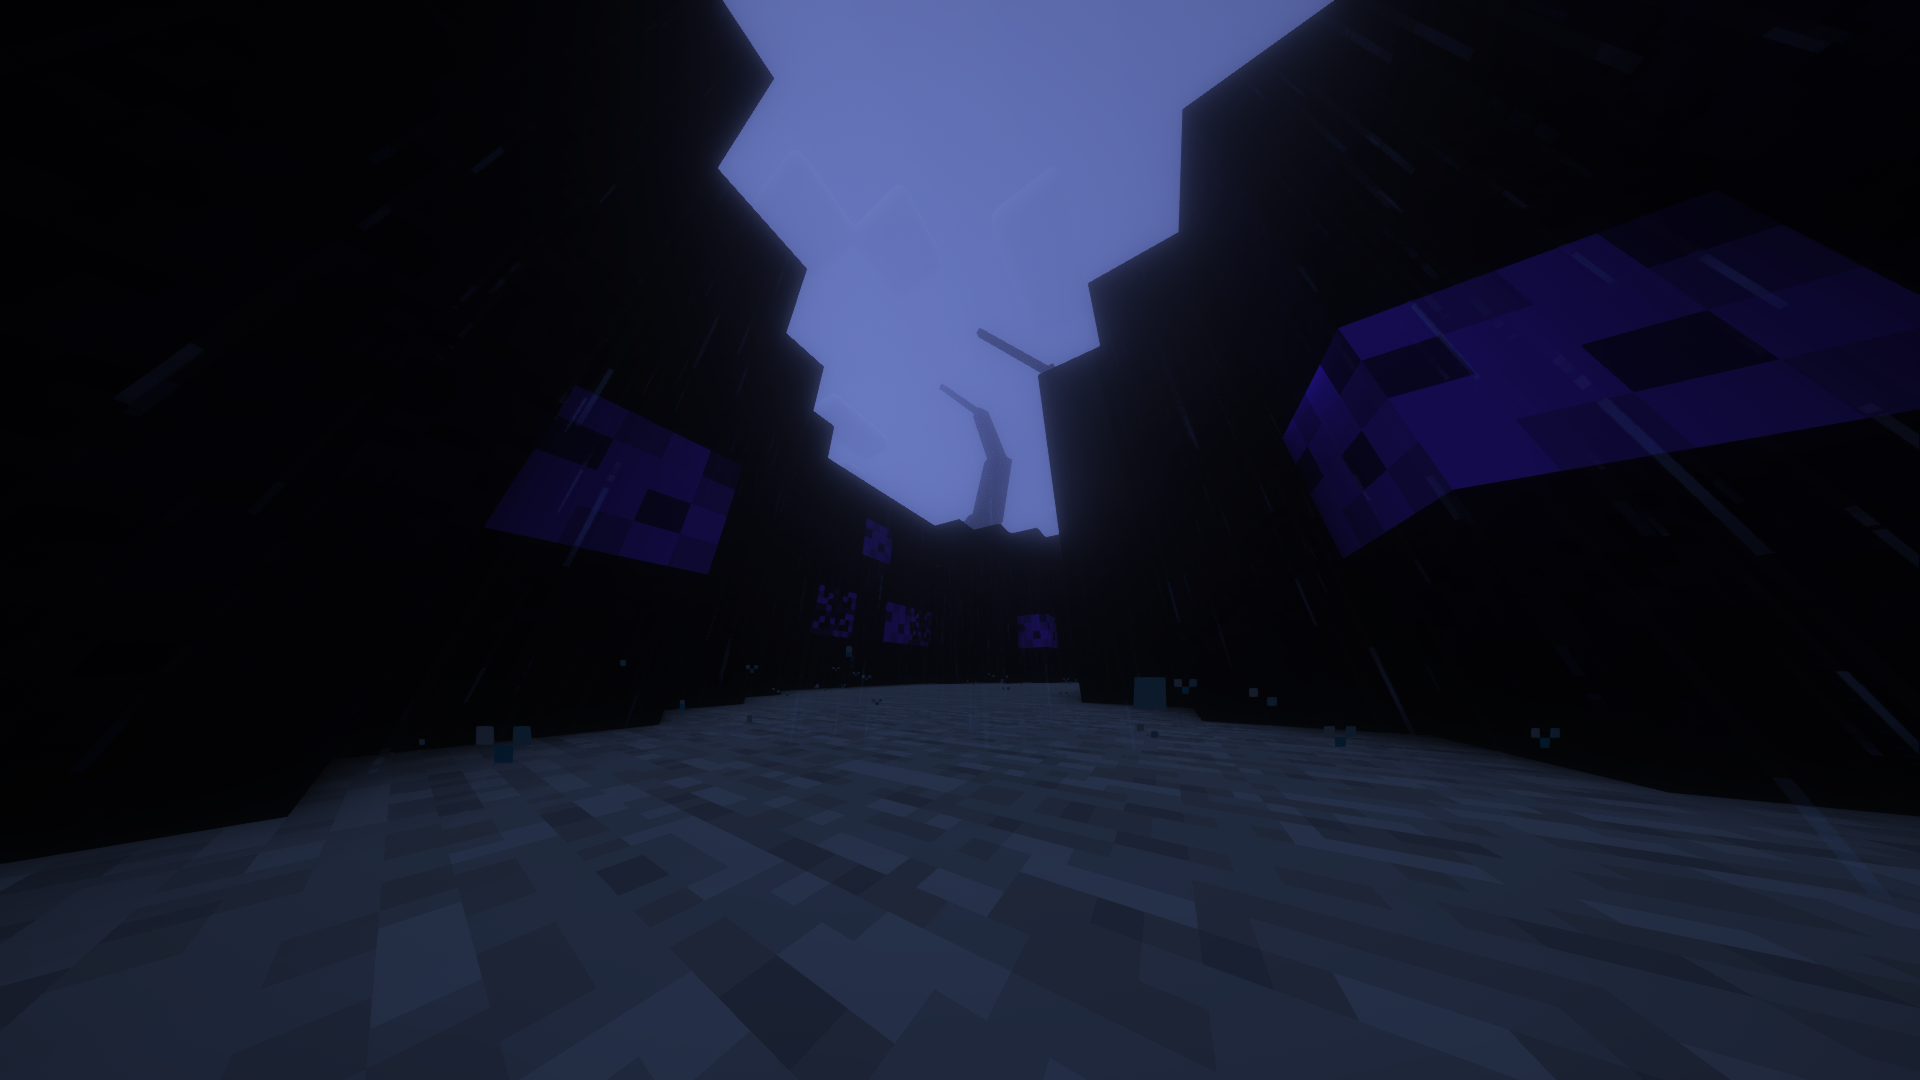 MCSM Wither Storm